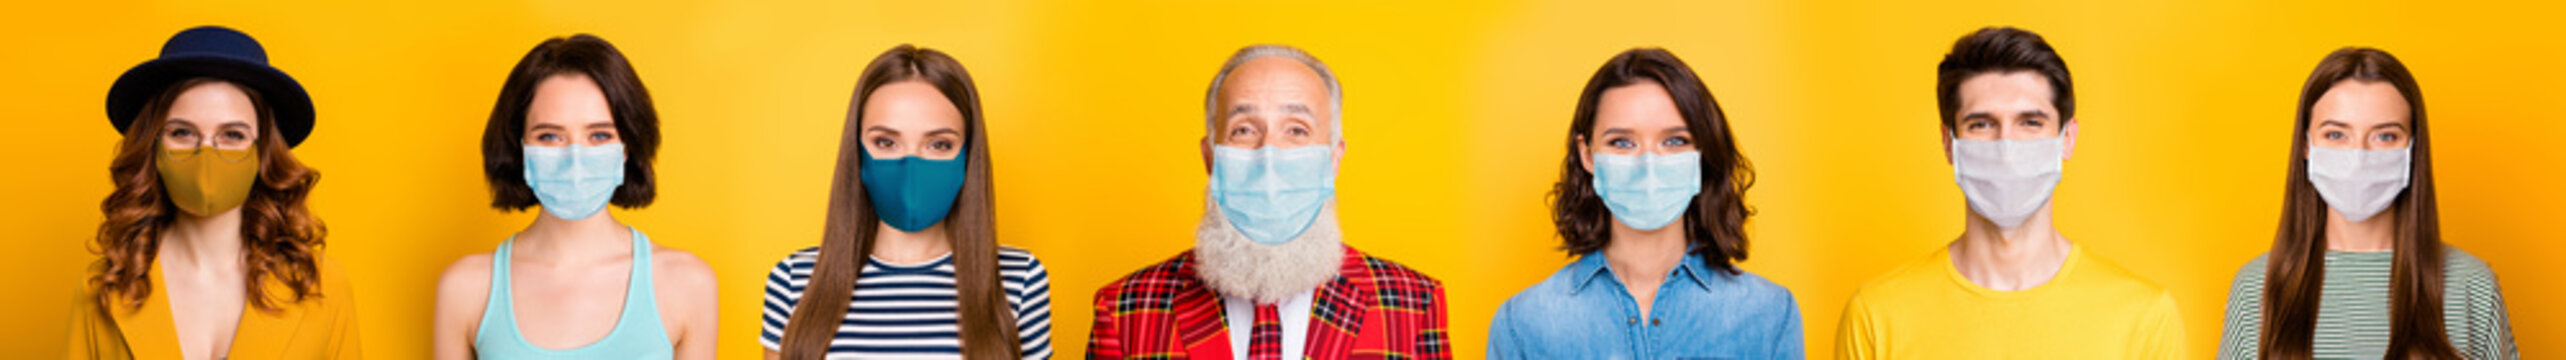 Stay at home covid-2019 fashion trend concept. Photo portrait montage composite multiple image of happy conscious group of people having sterile masks isolated on bright yellow background